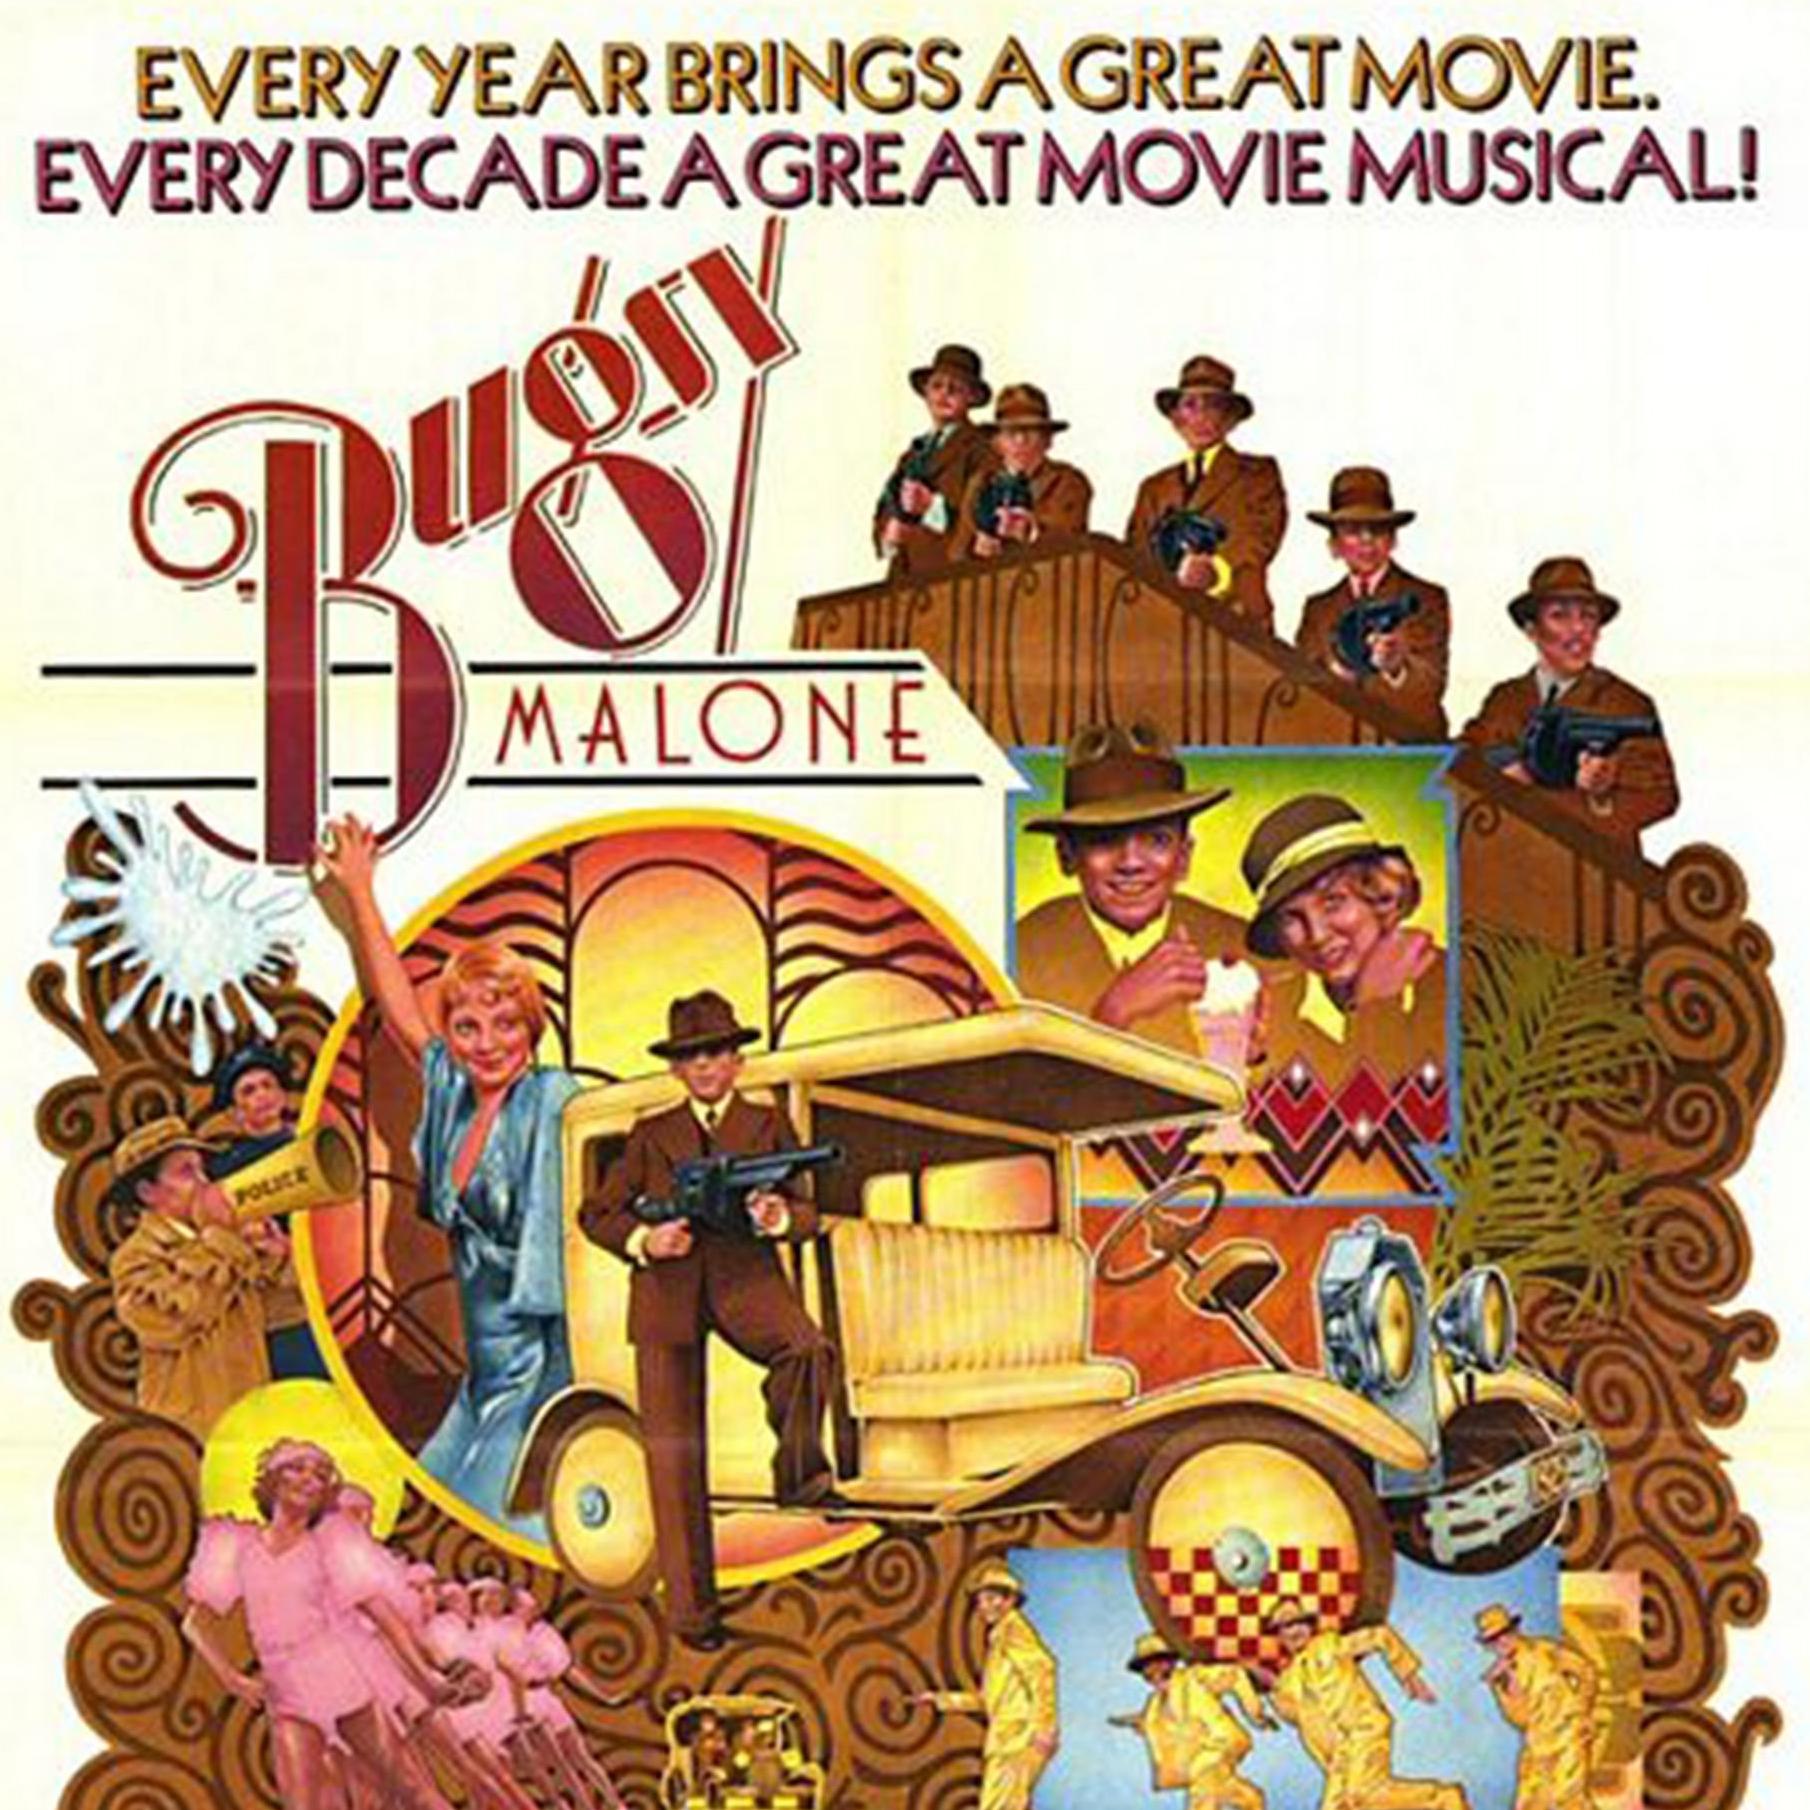 bugsy malone poster